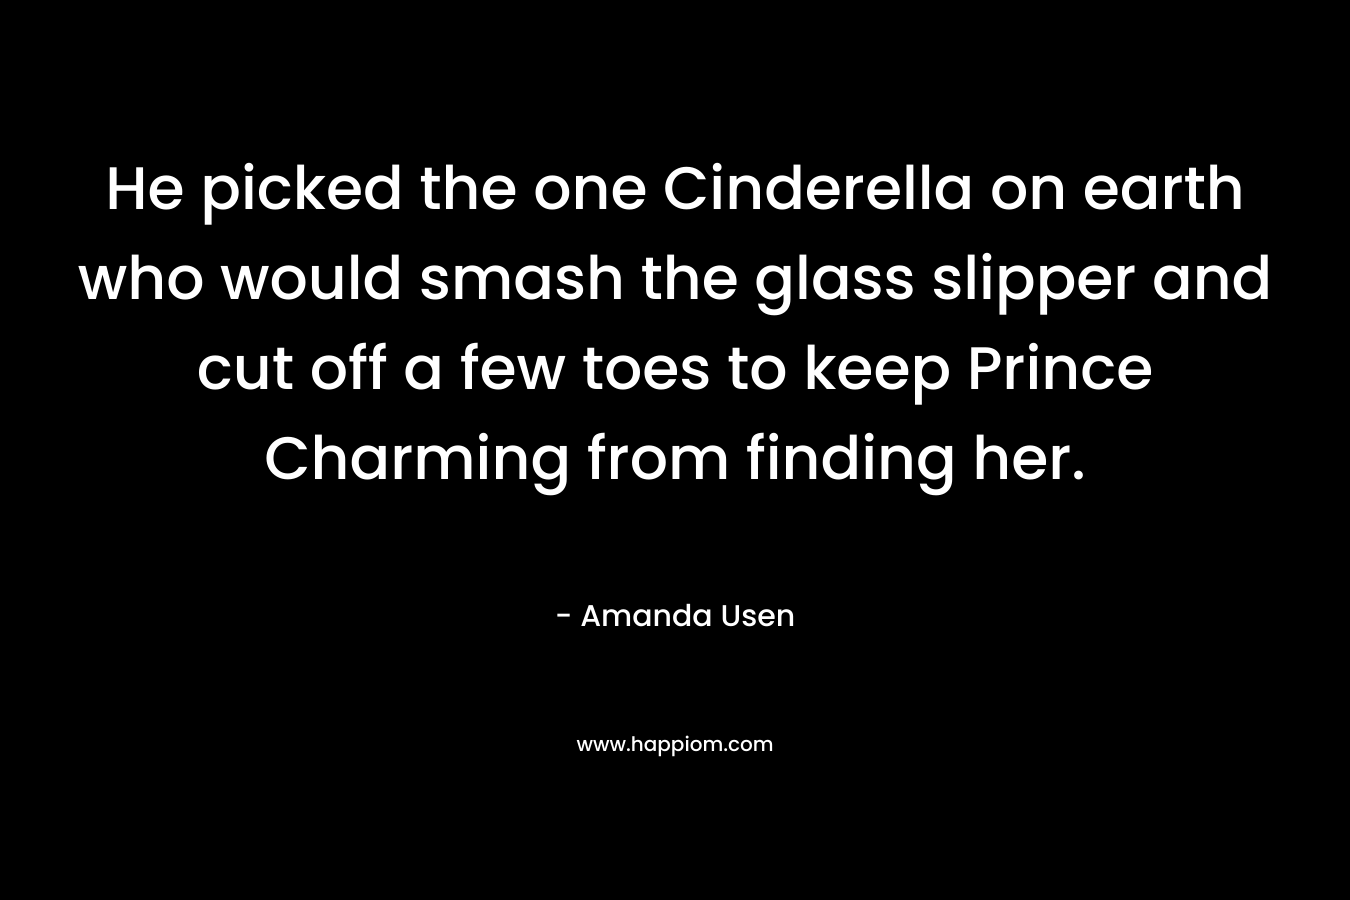 He picked the one Cinderella on earth who would smash the glass slipper and cut off a few toes to keep Prince Charming from finding her.